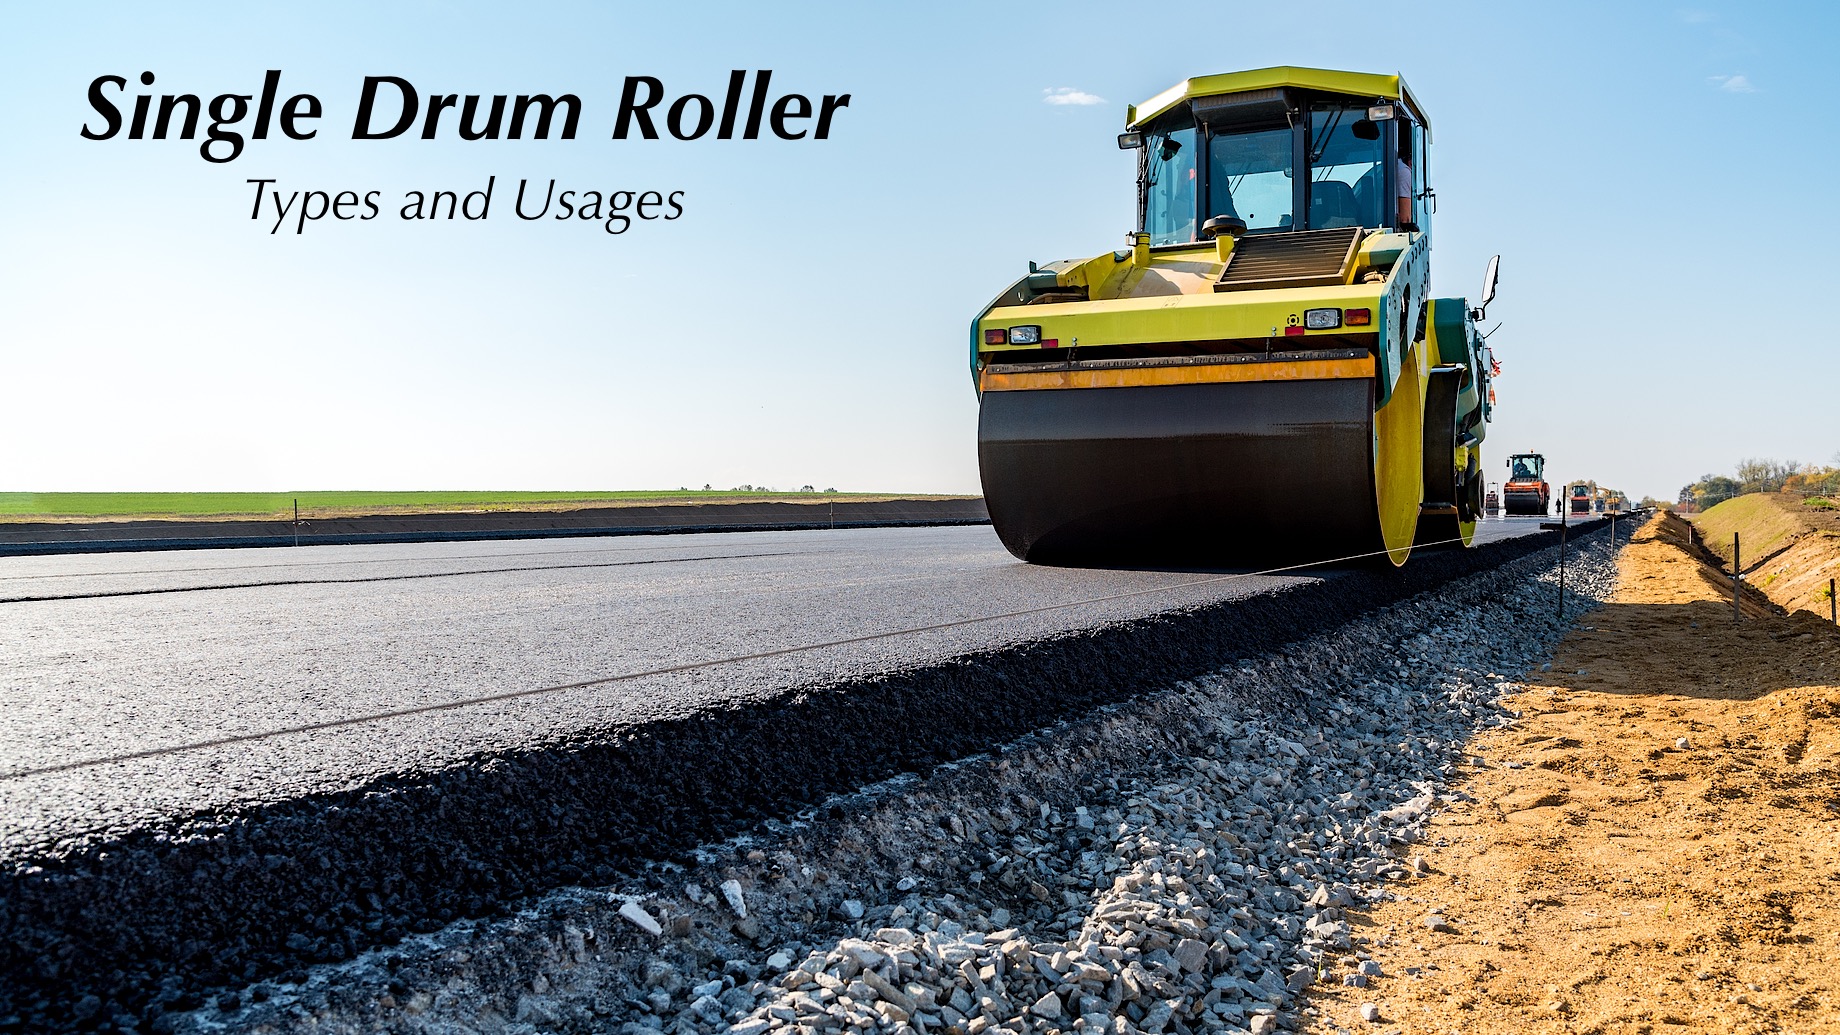 Single Drum Roller - Types and Usages